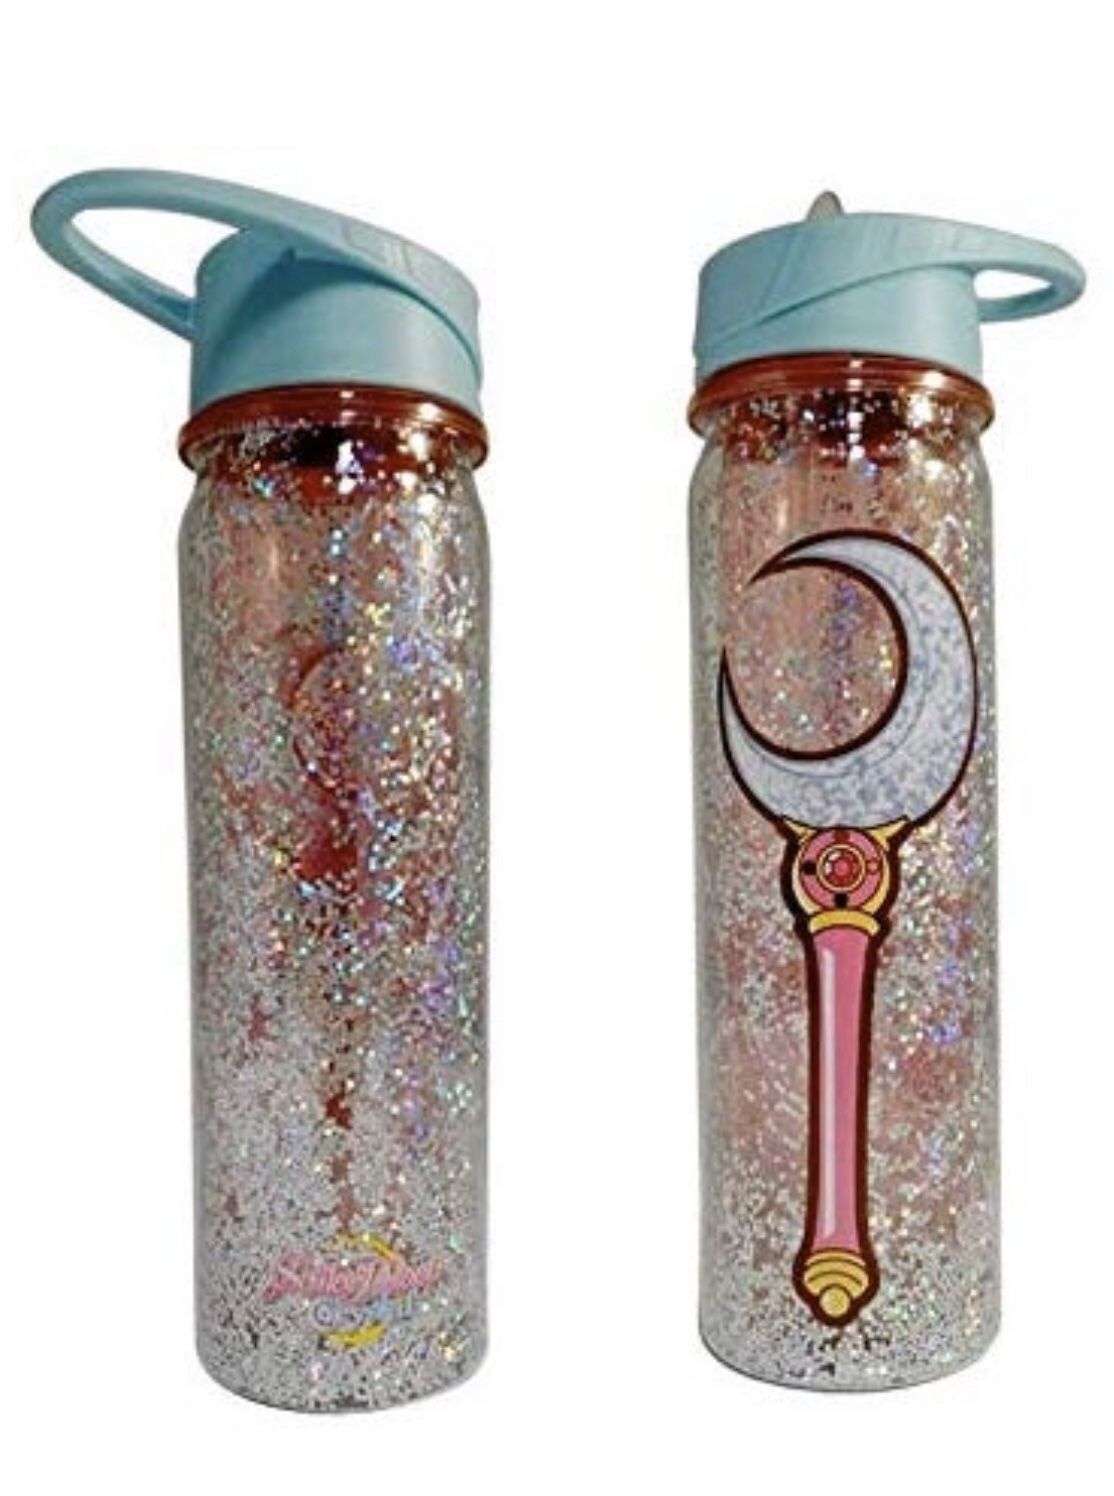 NEW IN BOX Sailor moon water bottle 18oz